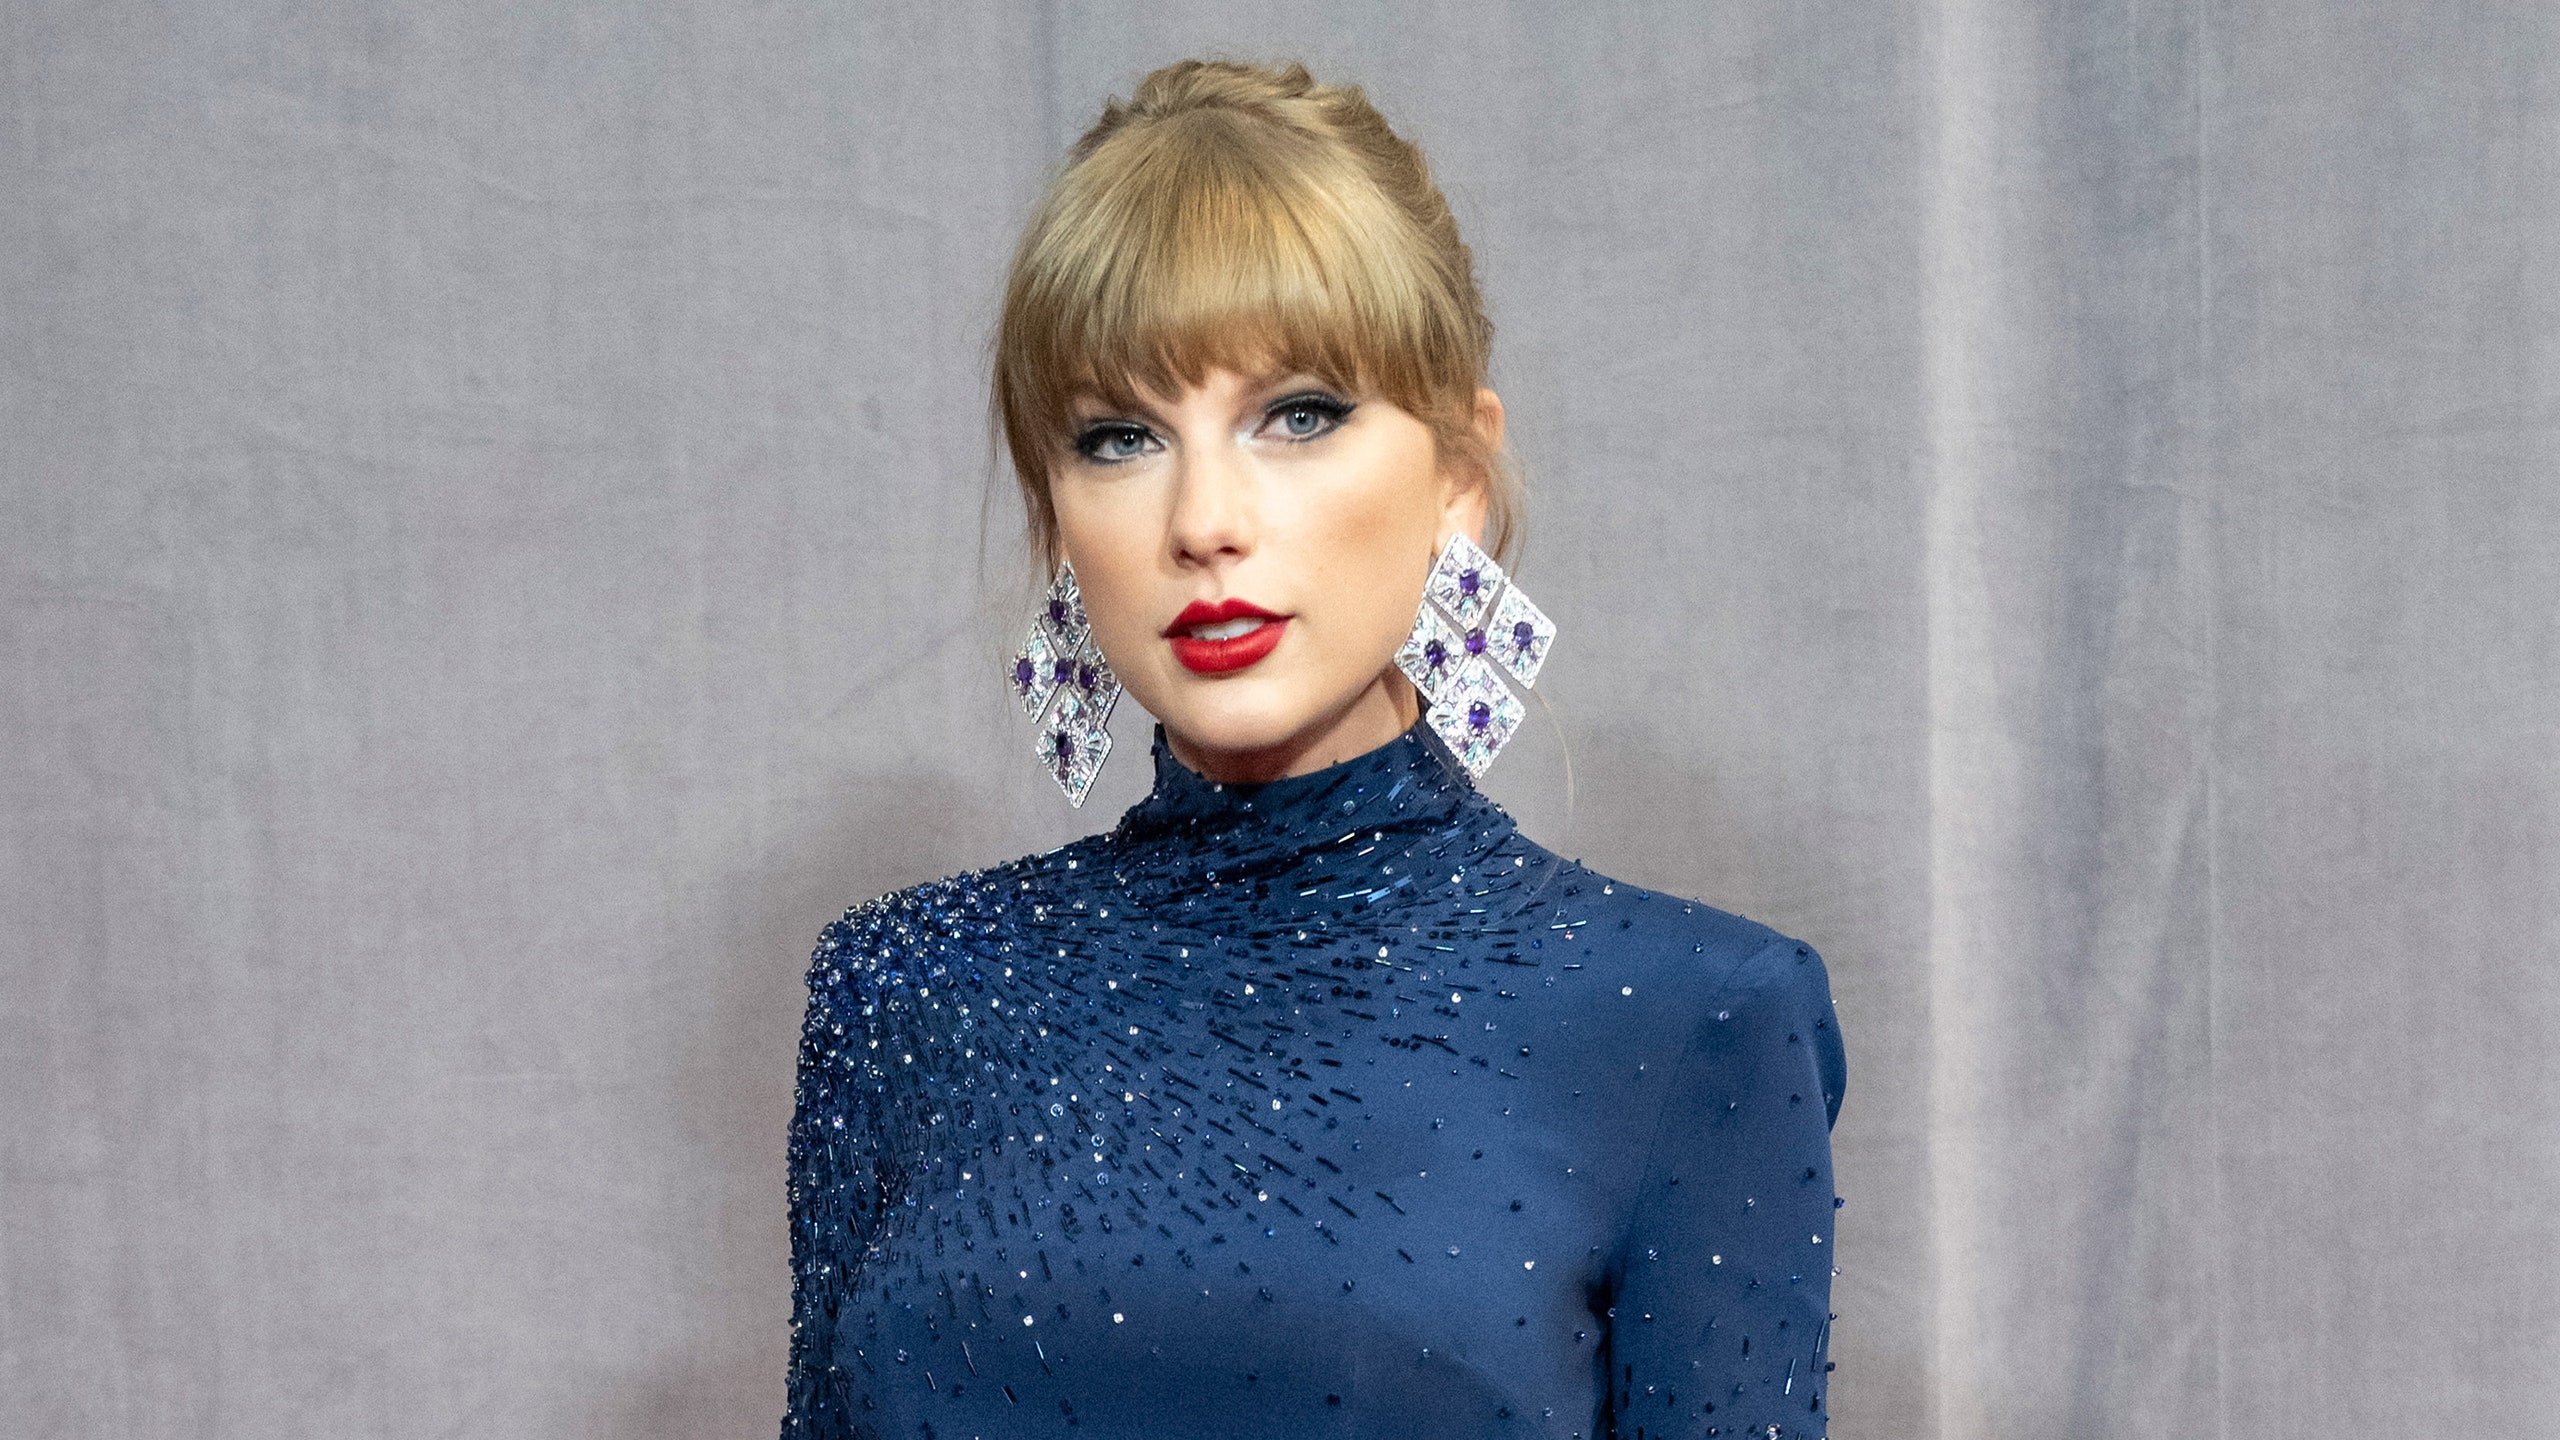 Taylor Swift Had The Best Time At The Grammys, And Here Are the Pics to Prove It